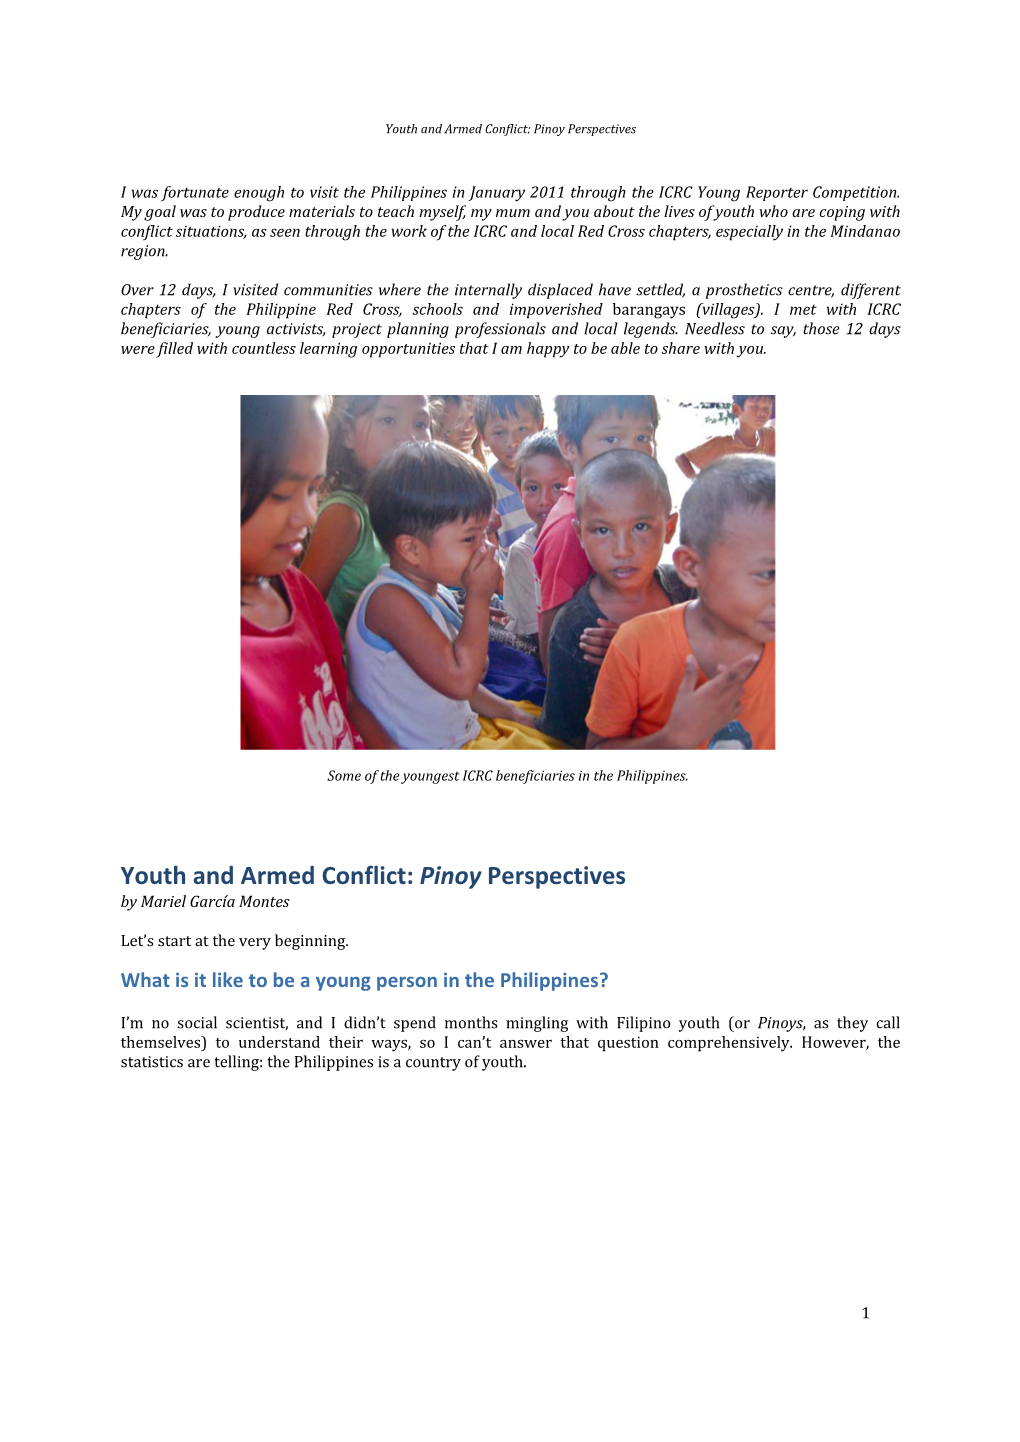 Youth and Armed Conflict: Pinoy Perspectives